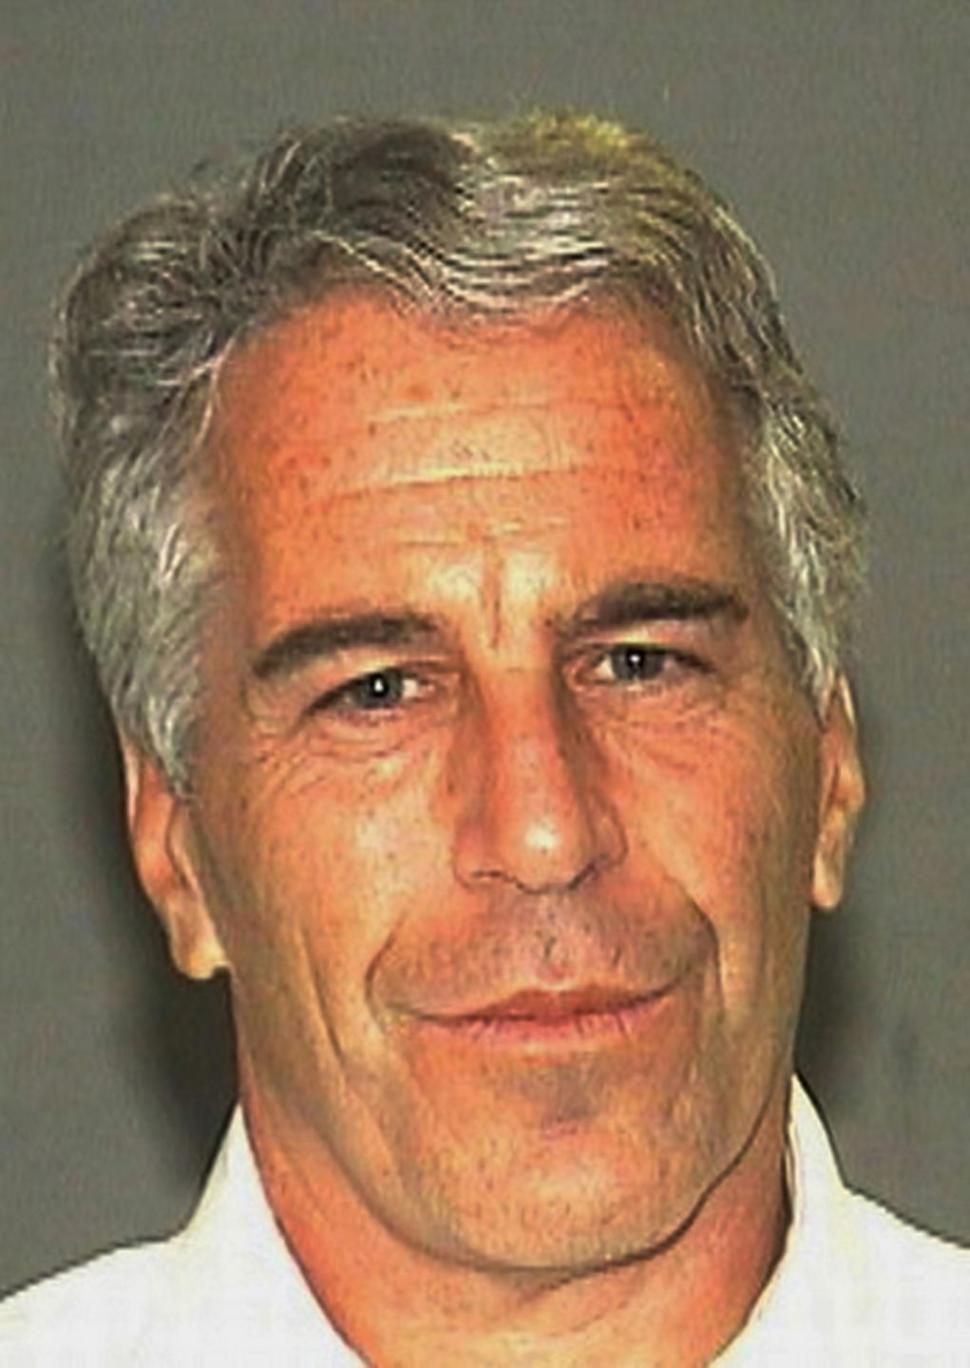 Prince Andrew has been accused of having sex with a 17-year-old ‘masseuse’ working for financier Jeffrey Epstein (above).